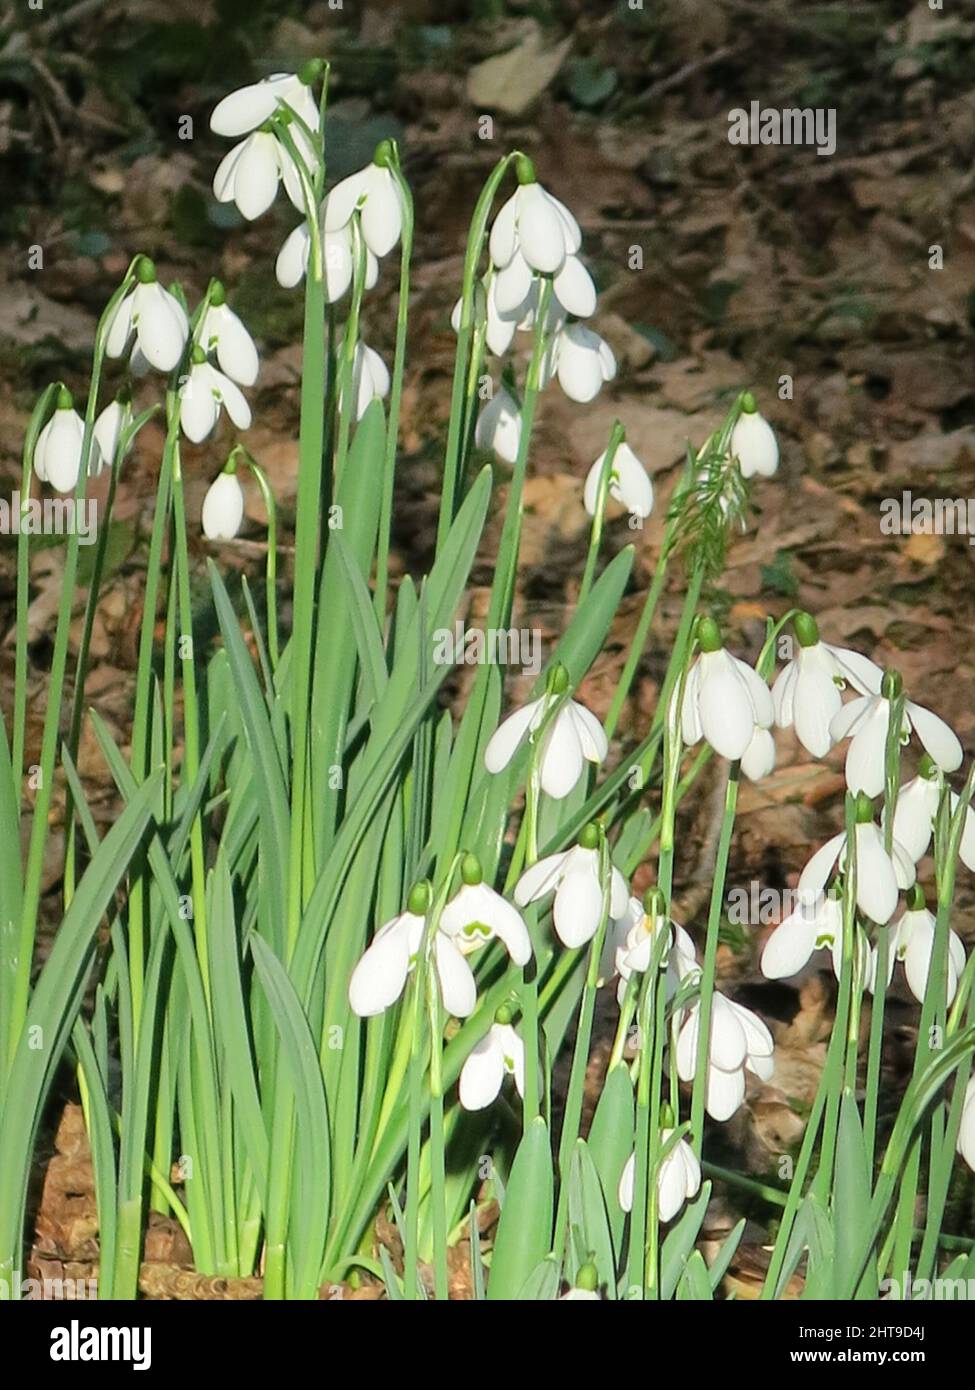 Close-up of a clump of the dainty, white, bell-shaped flowers of snowdrops (galanthus) in full bloom in an English woodland in late February. Stock Photo